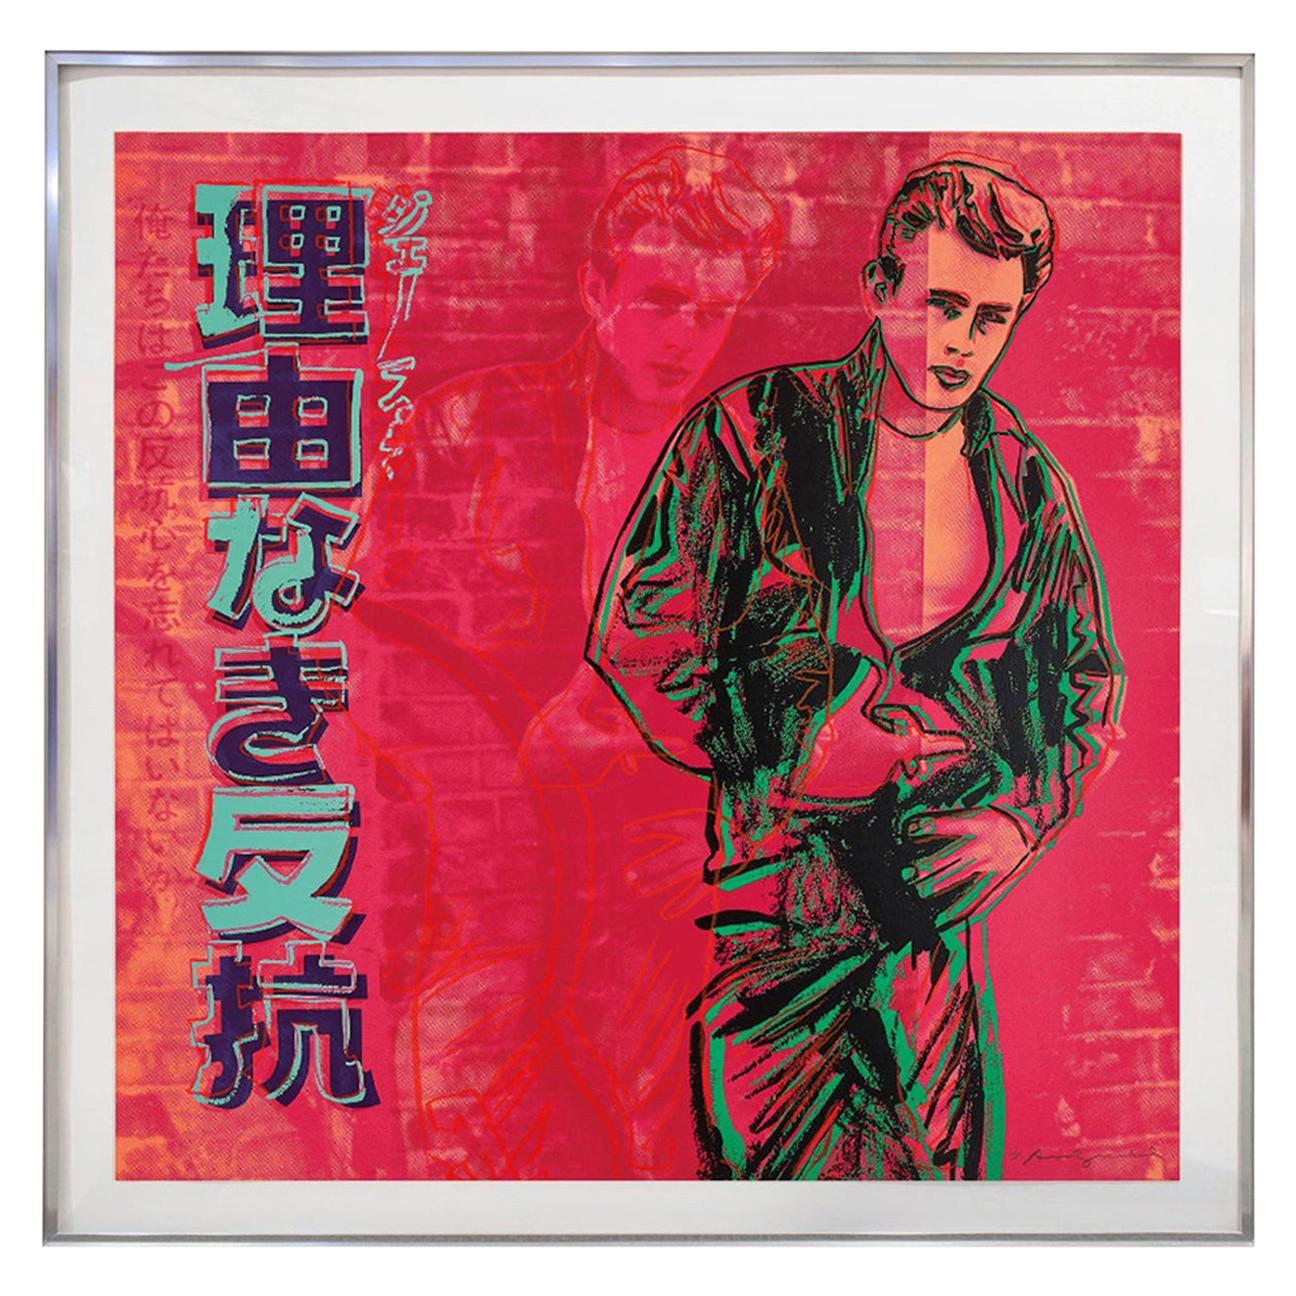 Andy Warhol "Rebel Without a Cause James Dean" Screen Print from Ads, 1985